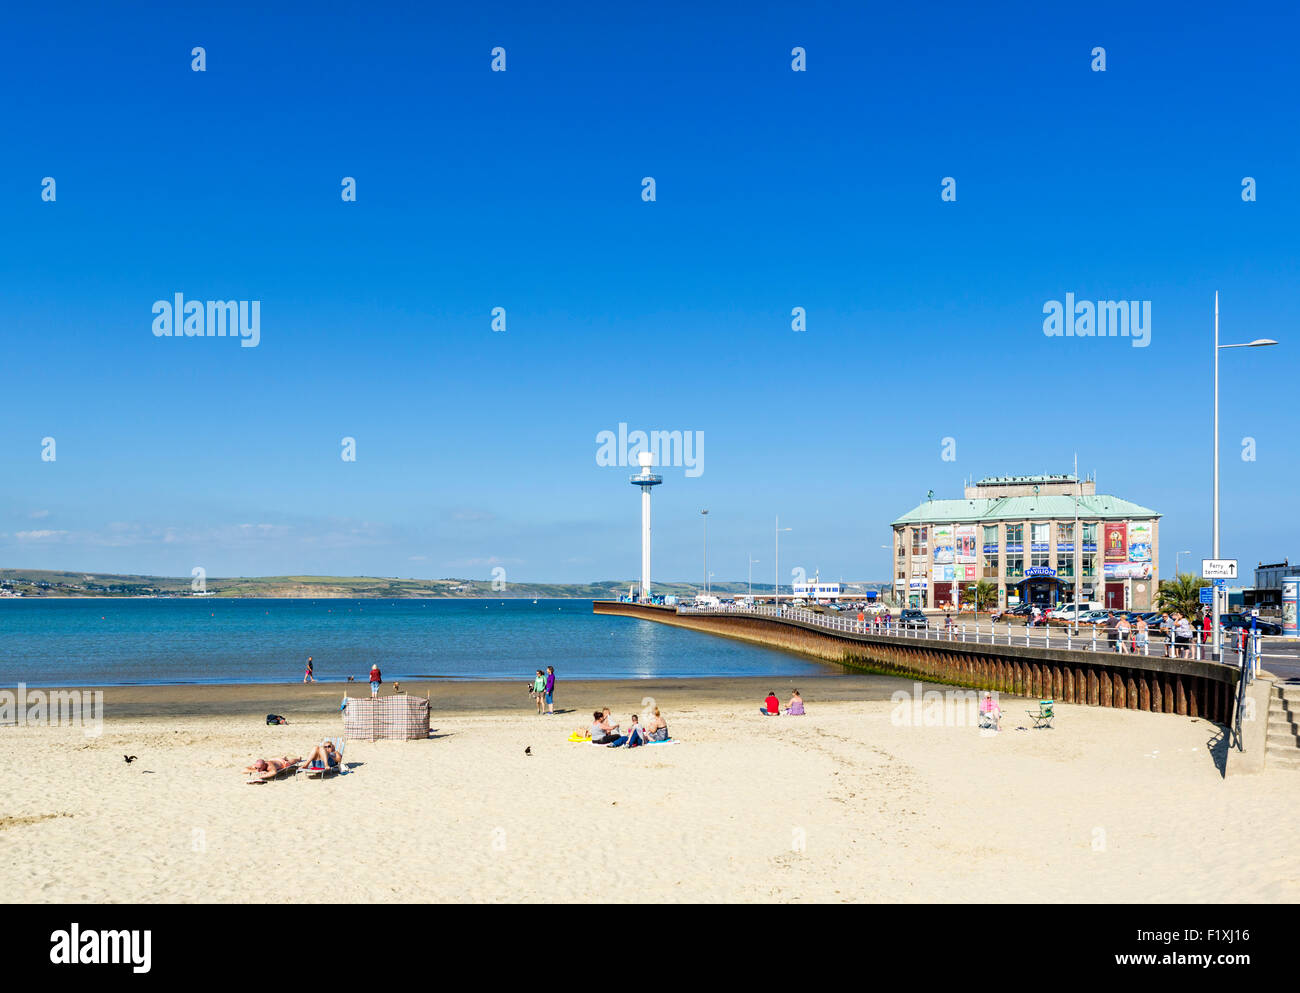 The town beach and Pavilion in Weymouth, Jurassic Coast, Dorset, England, UK Stock Photo